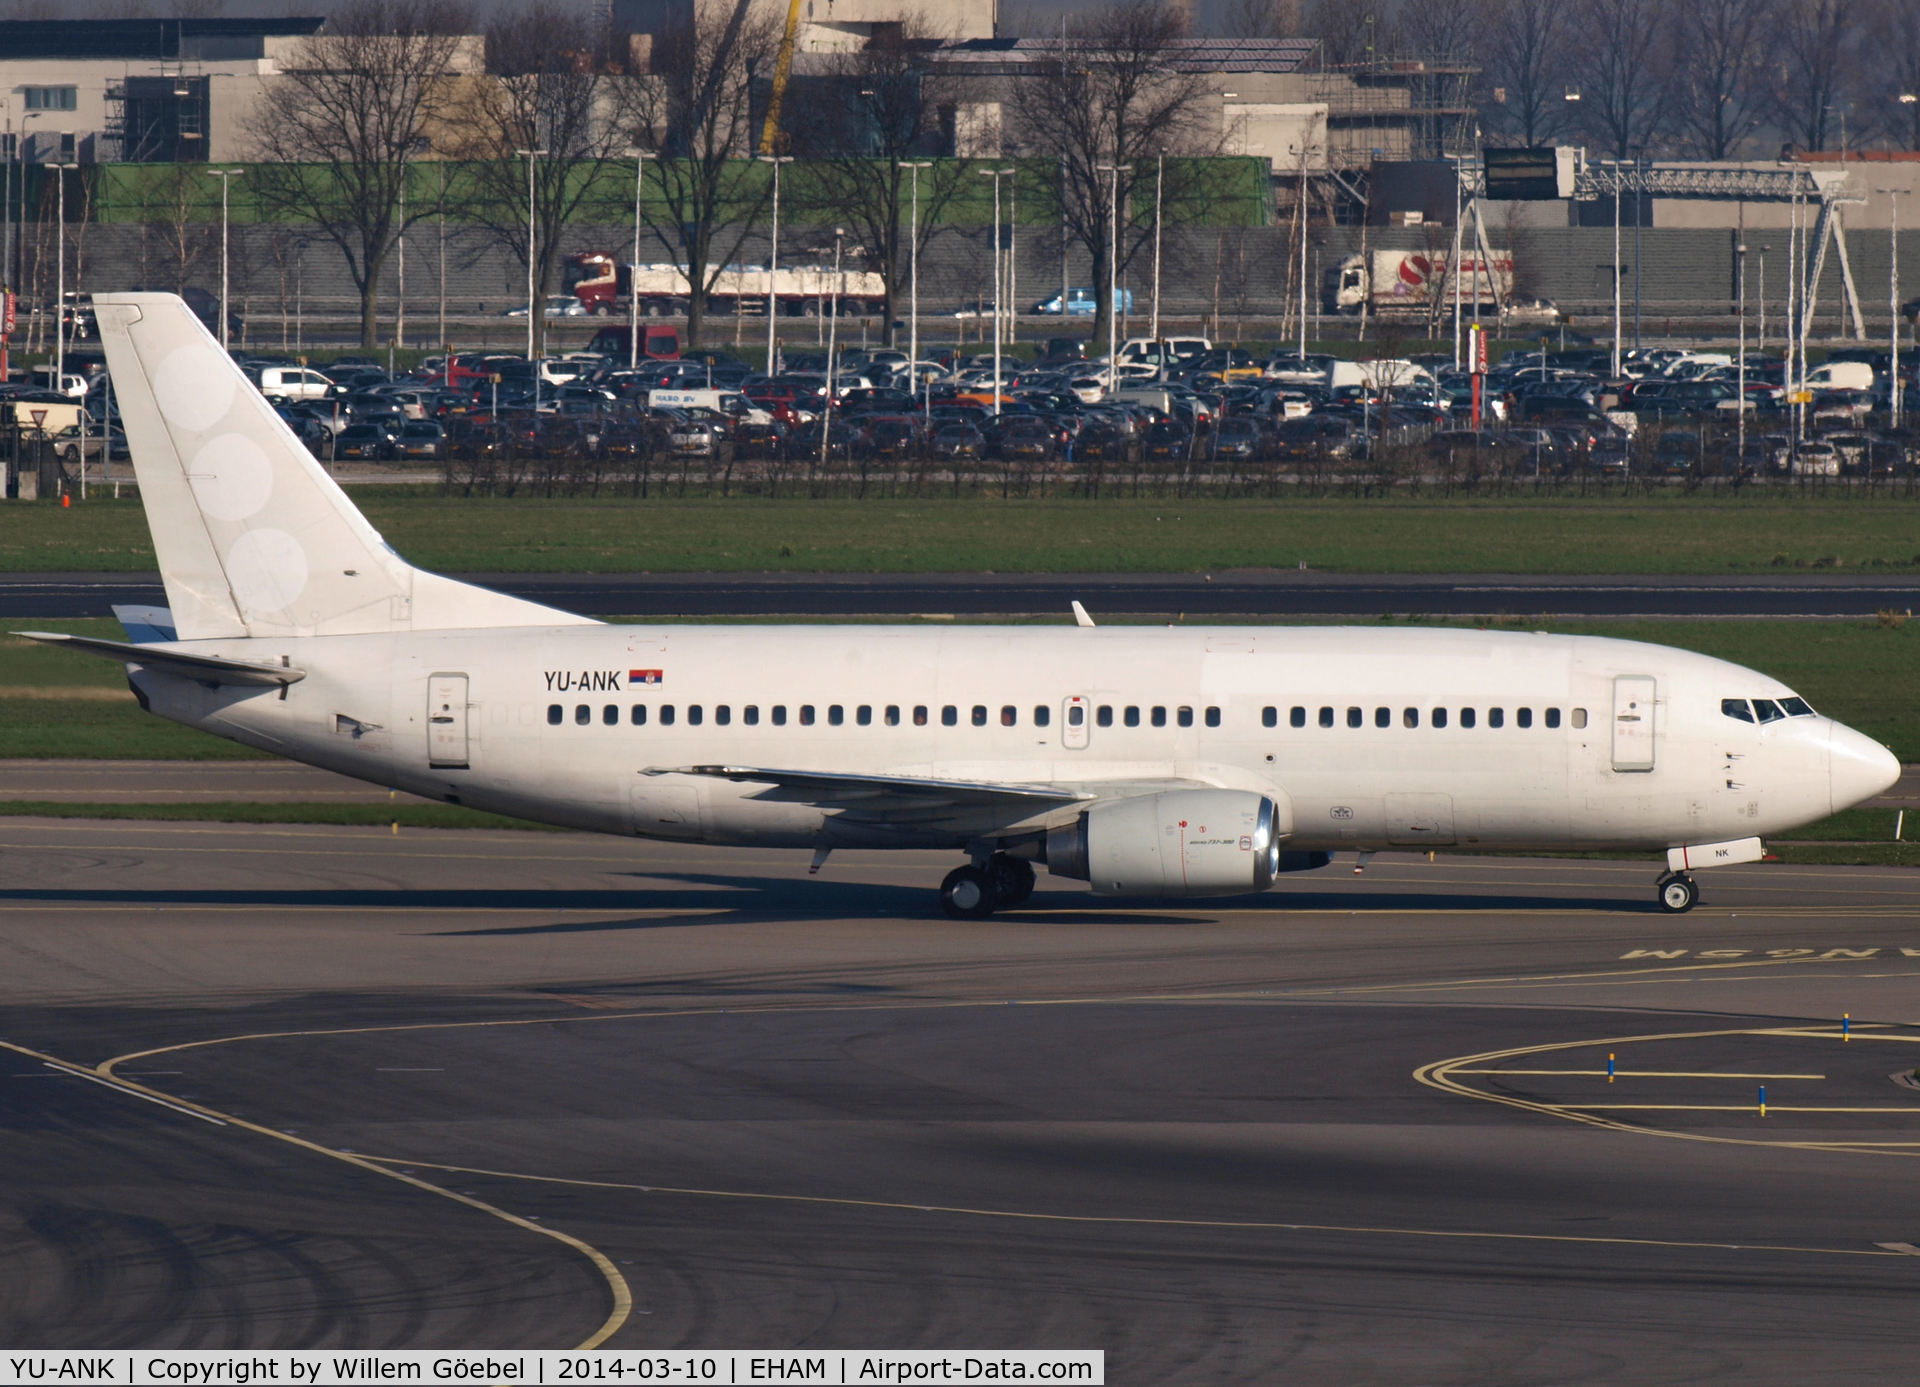 YU-ANK, 1986 Boeing 737-3H9 C/N 23715/1310, Taxi to the gate of Schiphol Airport in White Colours